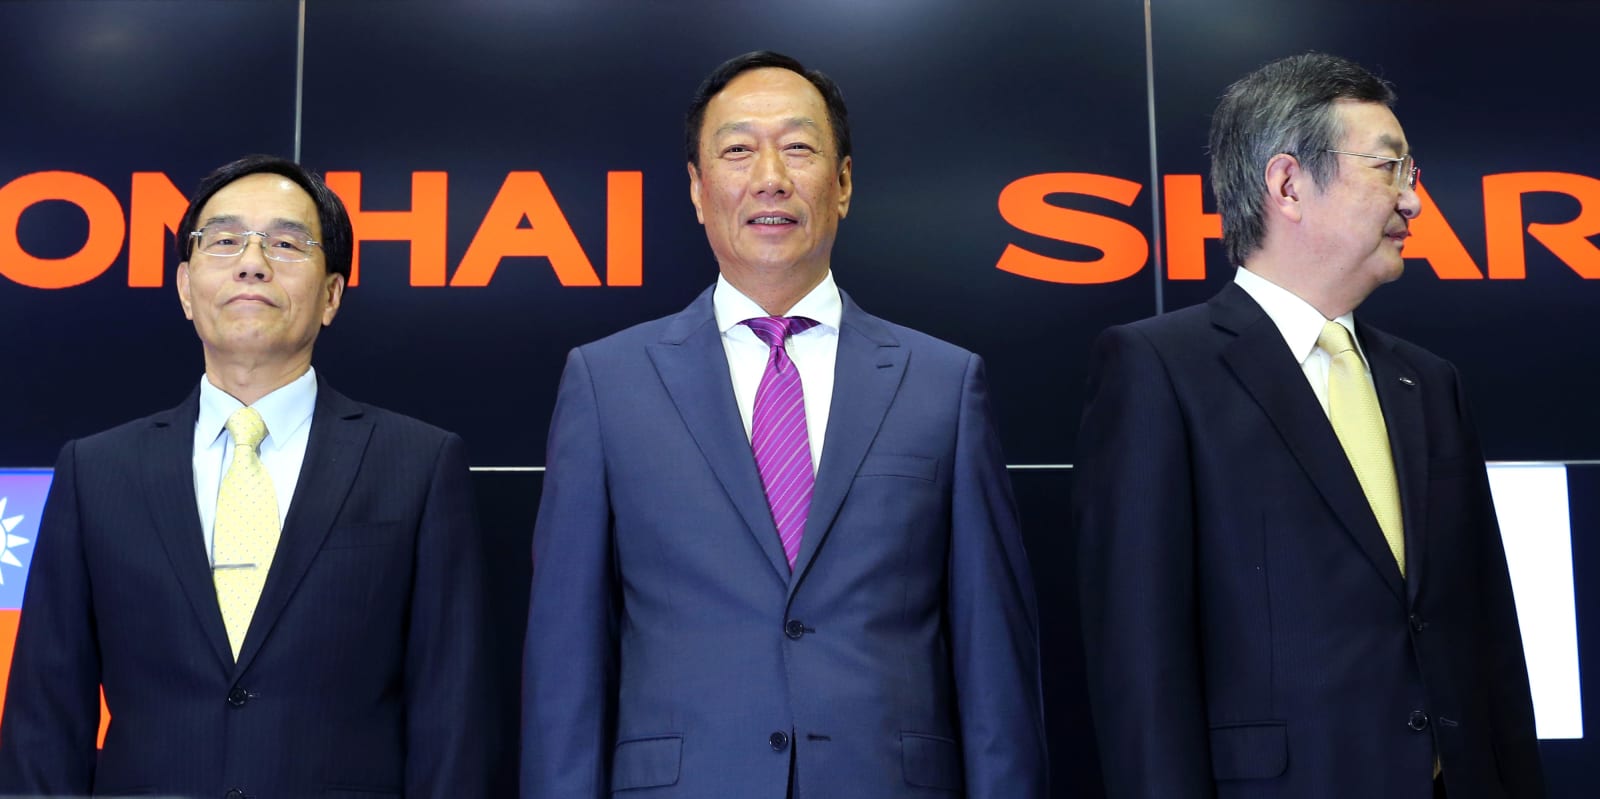 Foxconn Technology Group Chairman And Billionaire Terry Gou And Sharp Corp. President Kozo Takahashi Attend News Conference